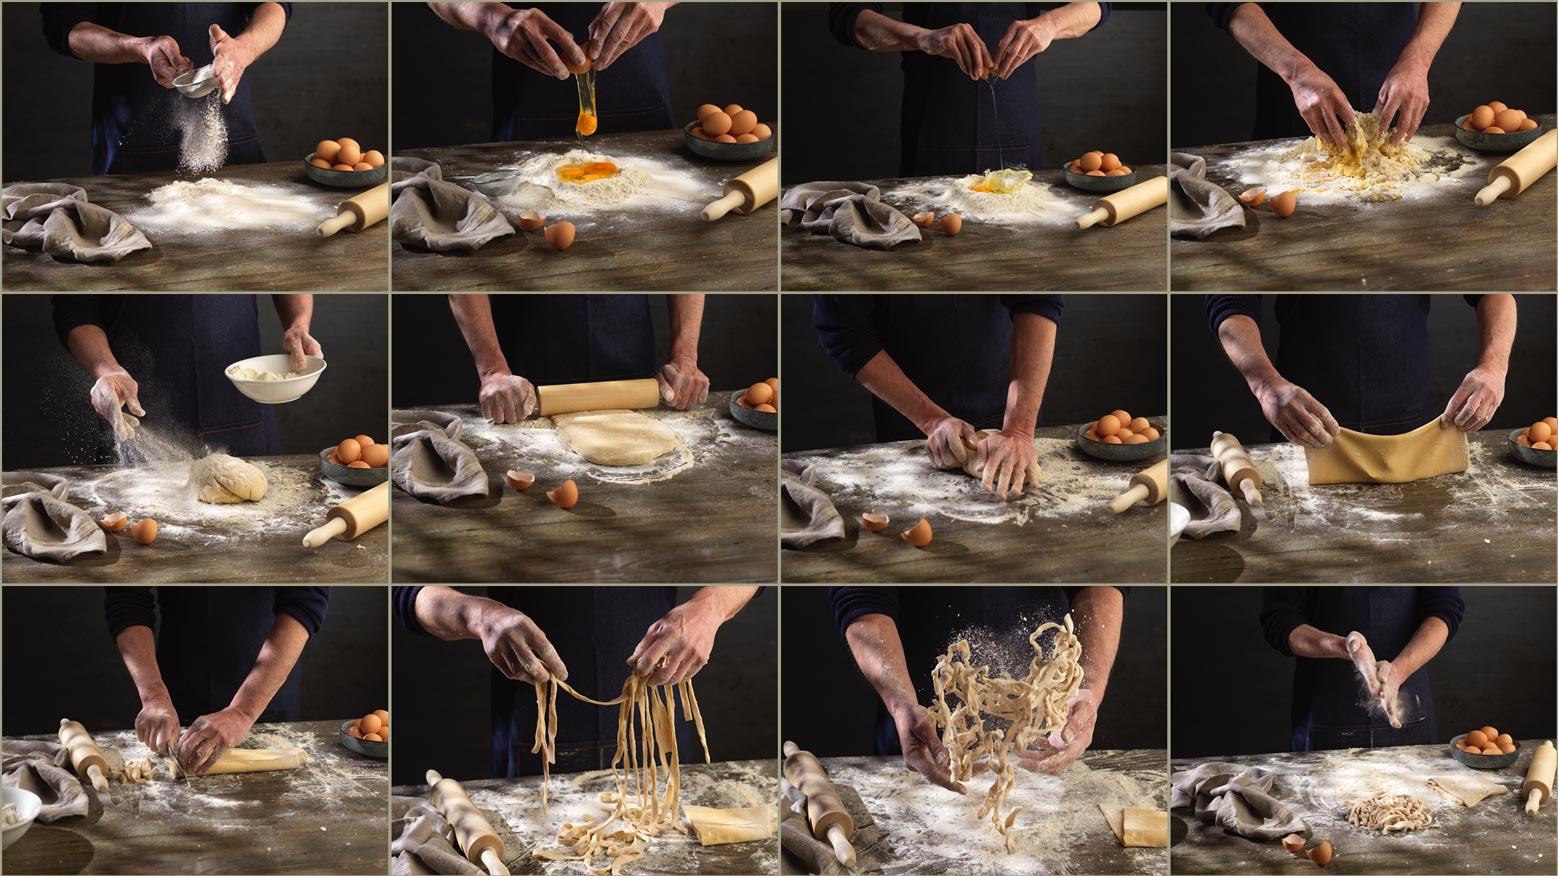 12 images of the process of pasta being made on a moody background 